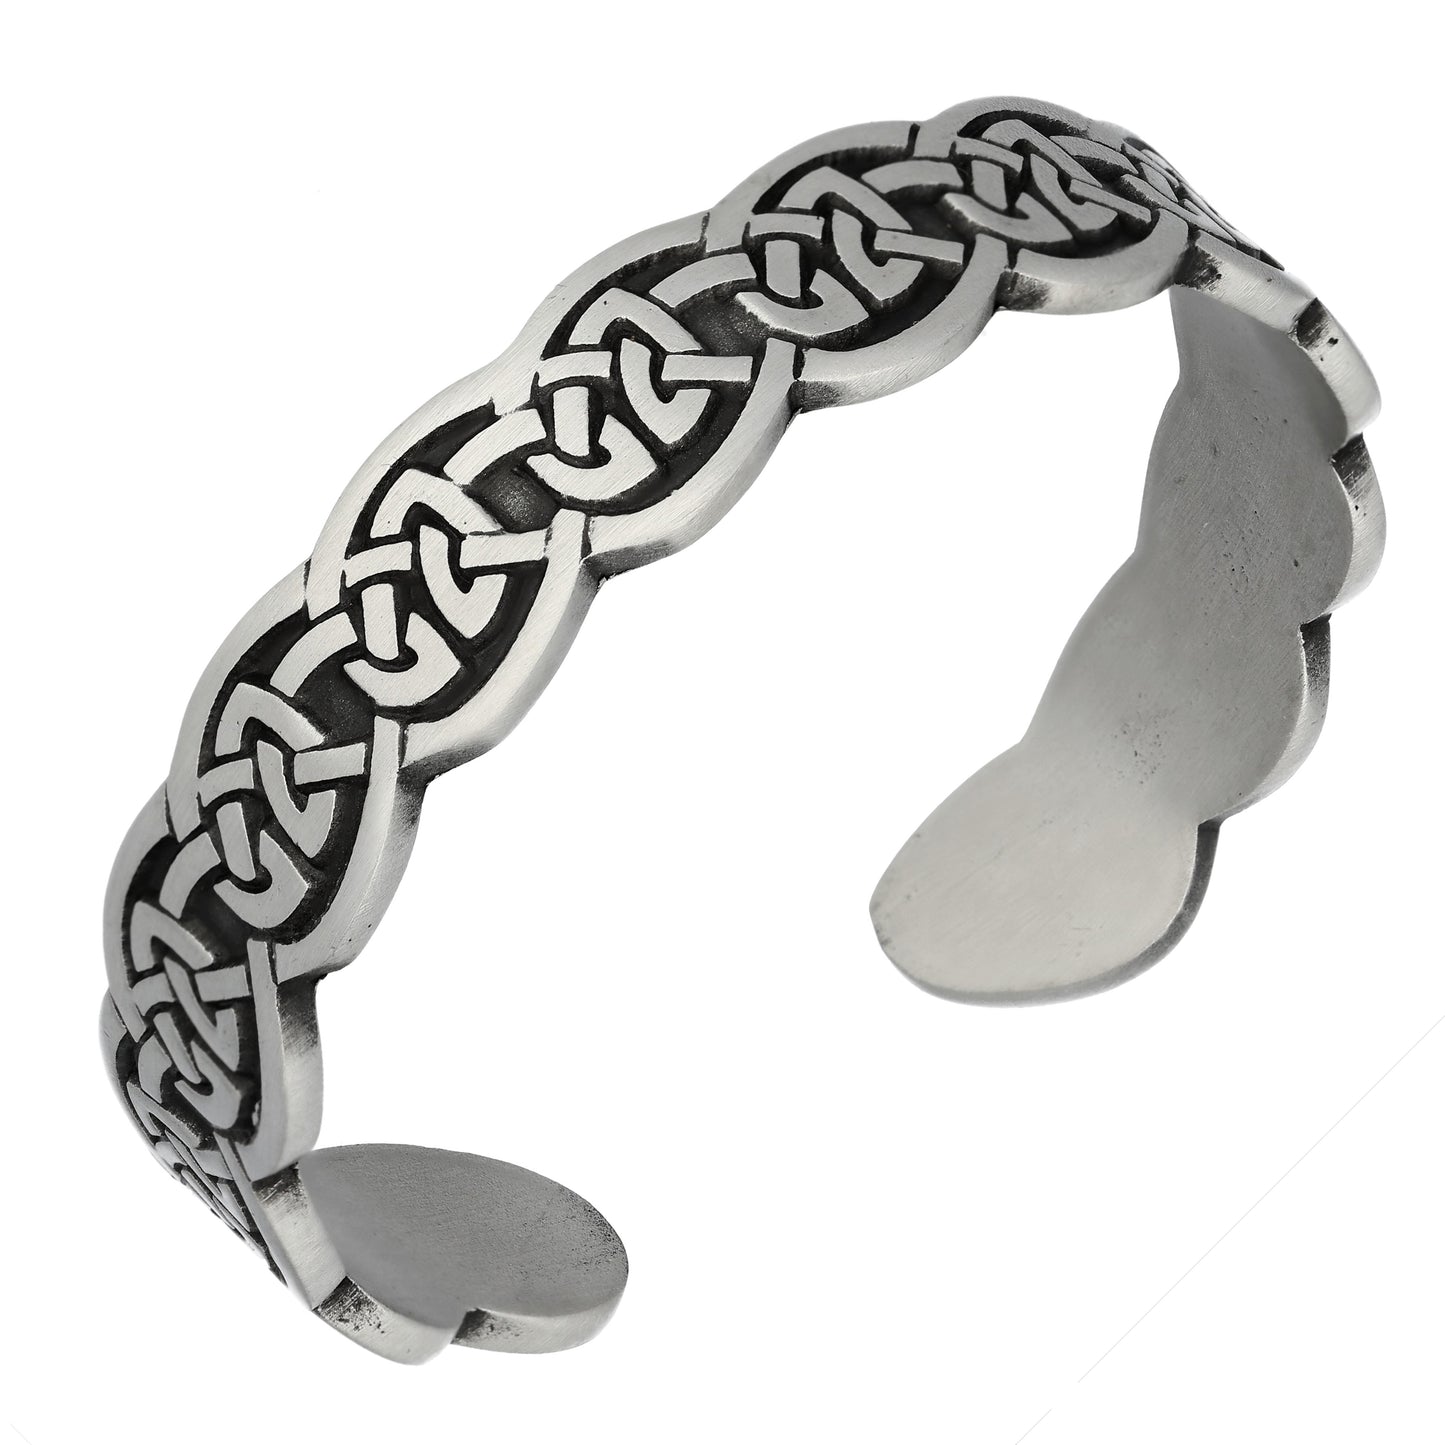 Narrow Engraved Cuff of Celtic Knots Pewter Adjustable 7" Bracelet - Silver Insanity